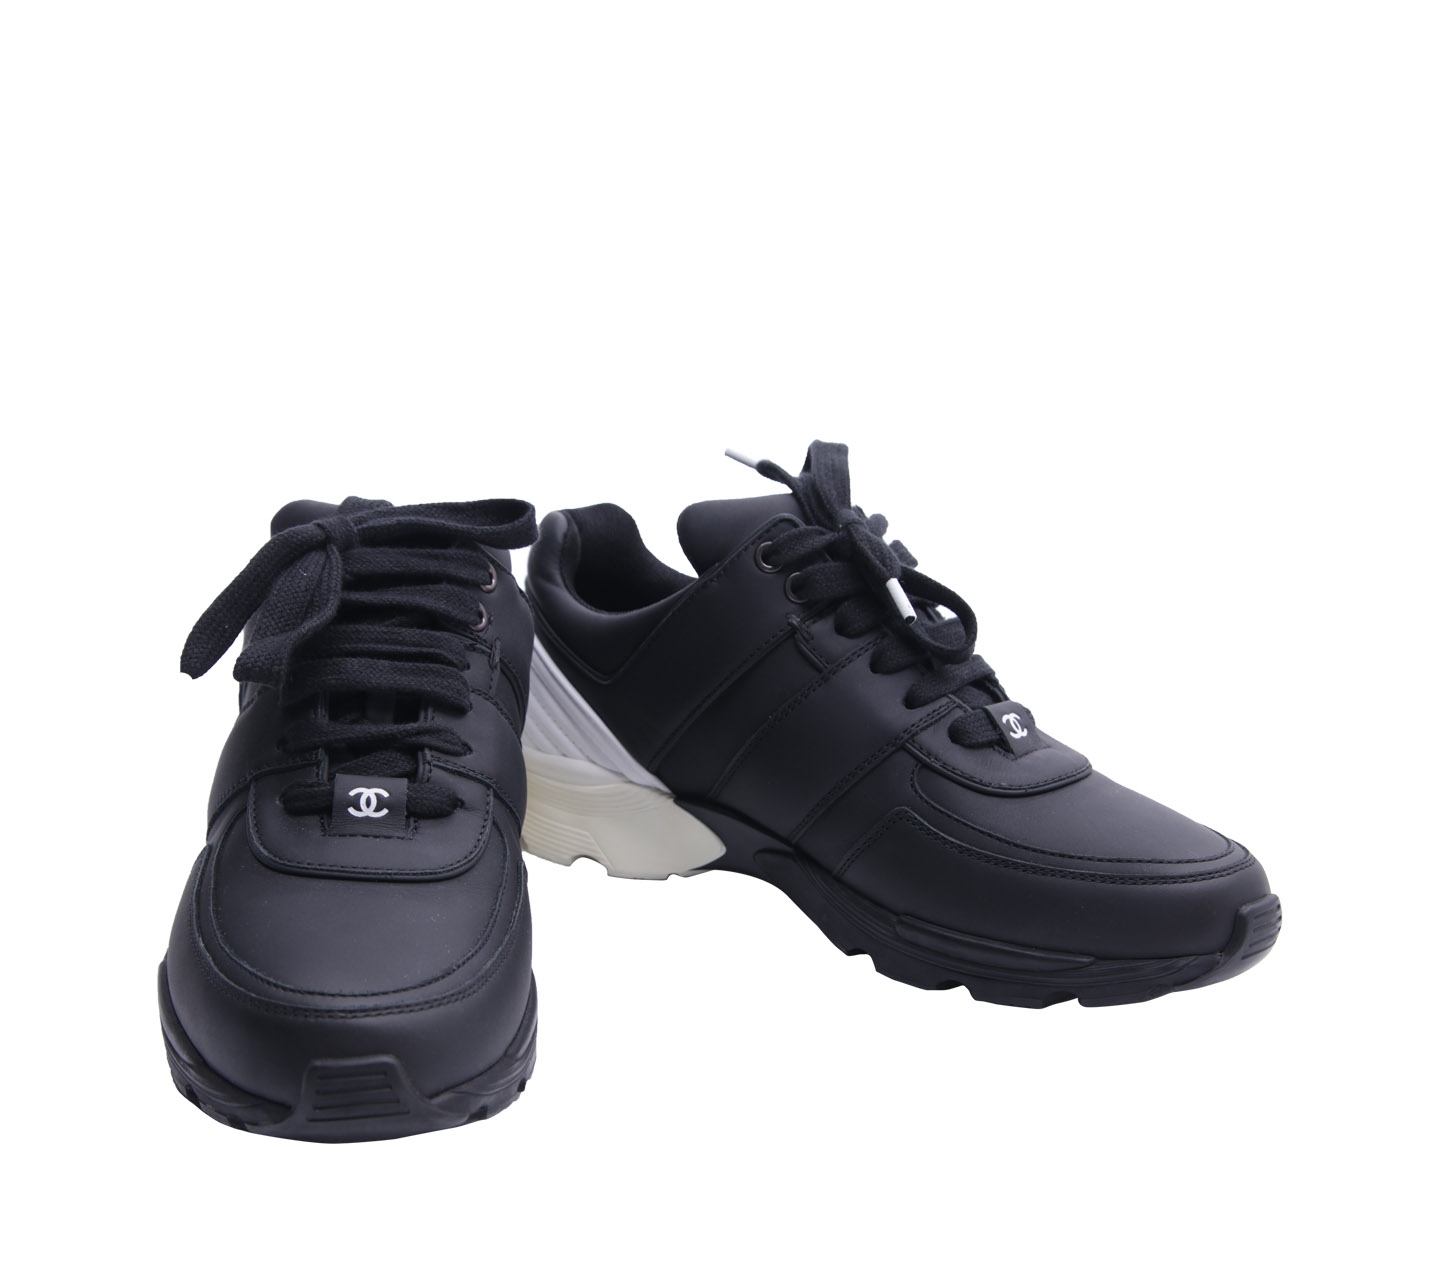 Chanel Black Leather Cc Trainer Tennis Sneakers